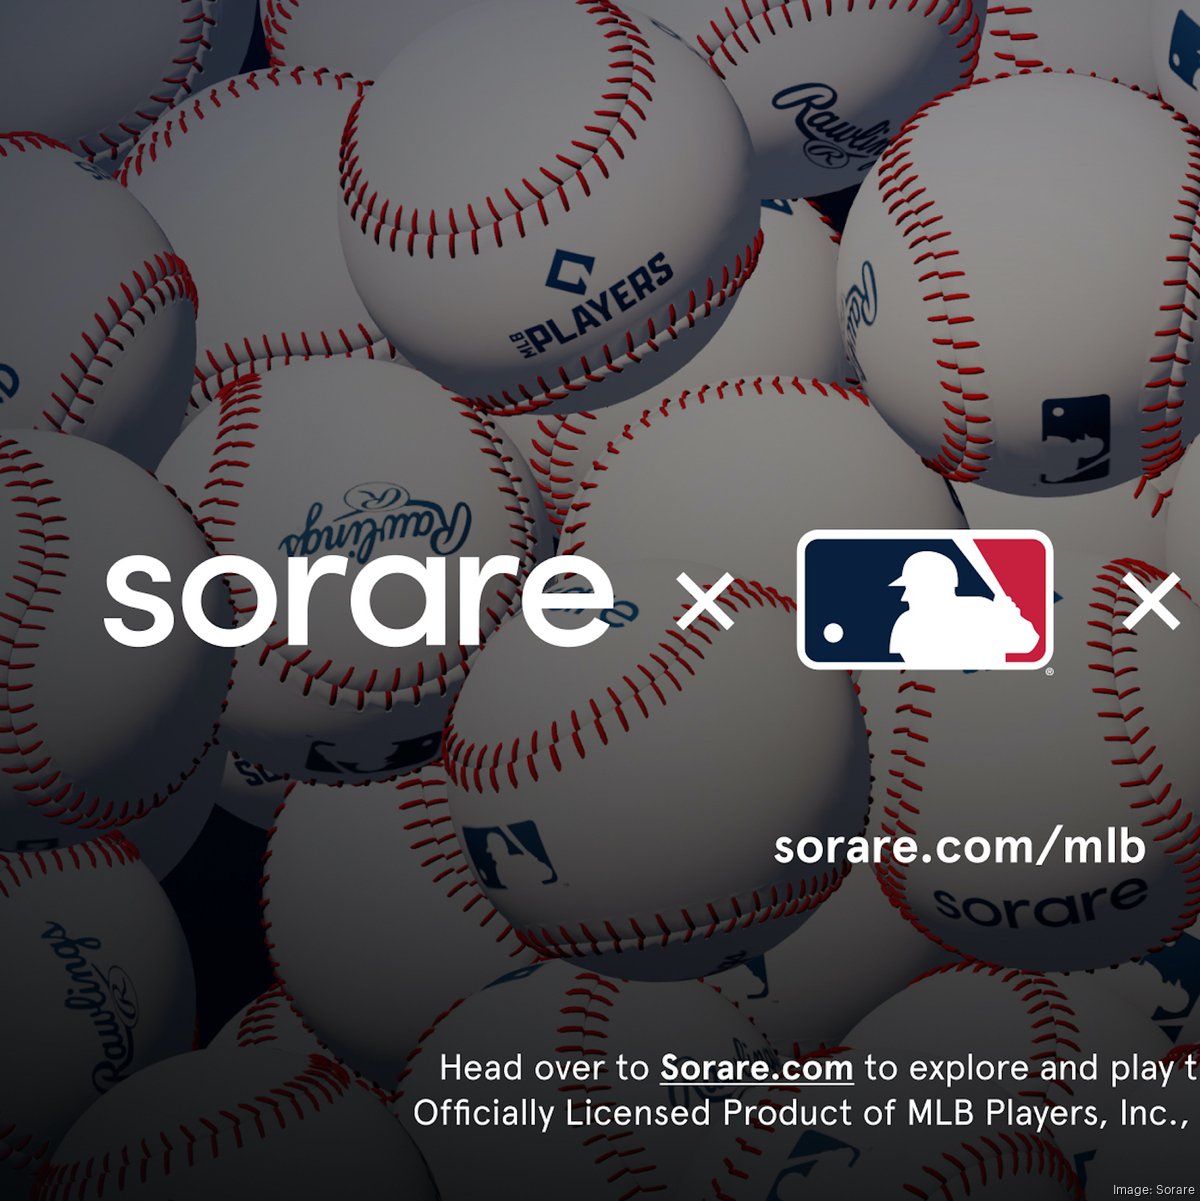 Major League Baseball to launch NFT game with Sorare